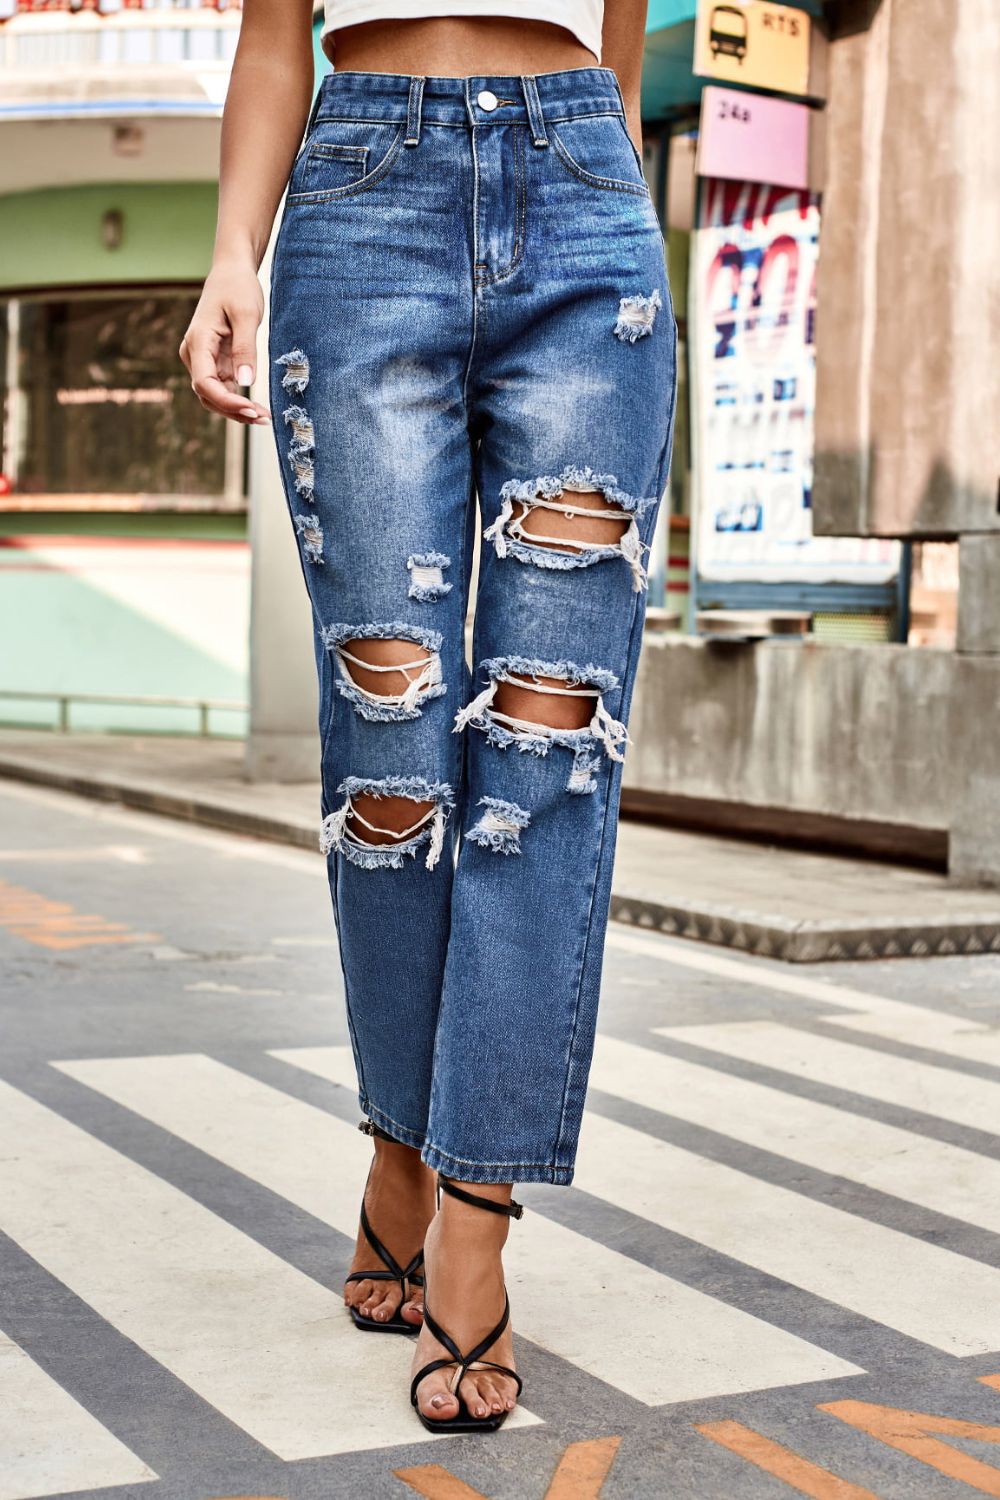 Distressed Buttoned Jeans with Pockets BLUE ZONE PLANET